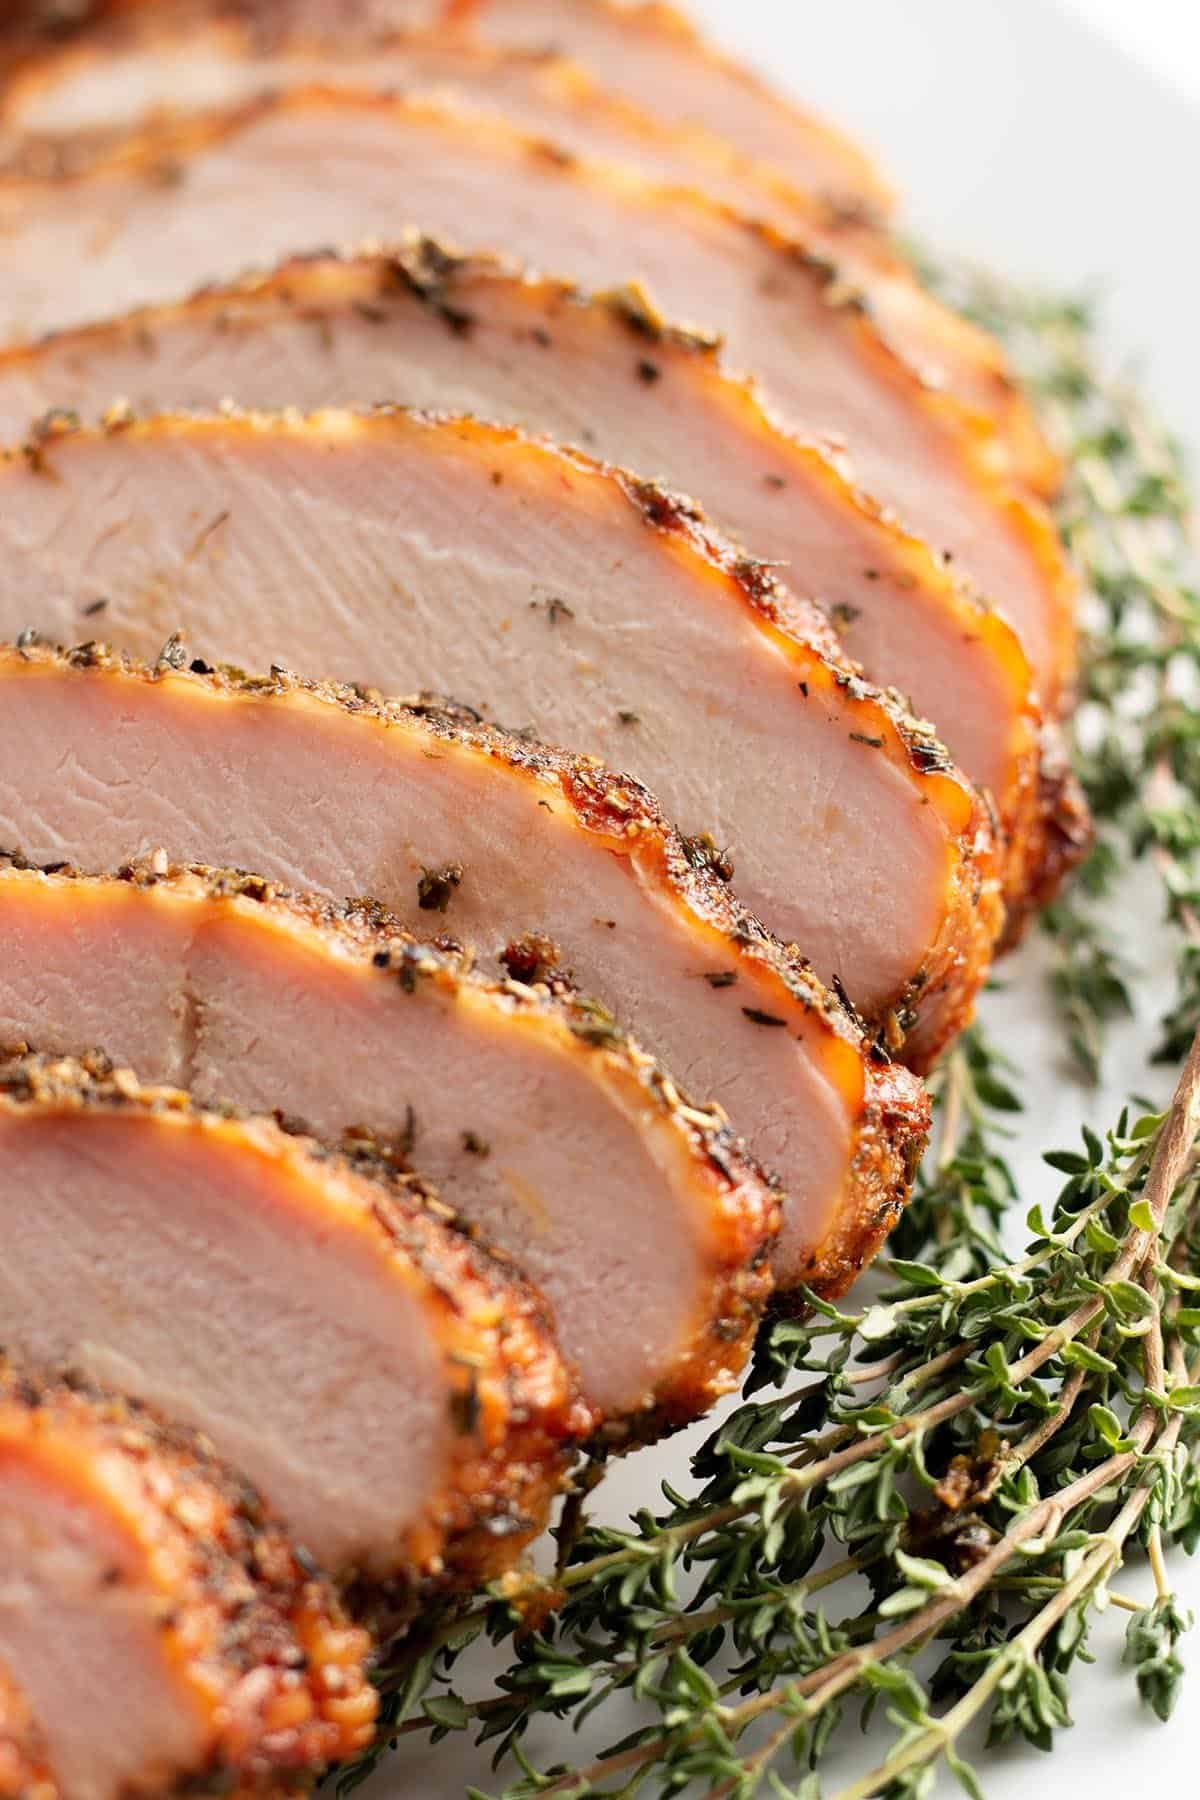 Slices of a smoked turkey breast with fresh thyme.